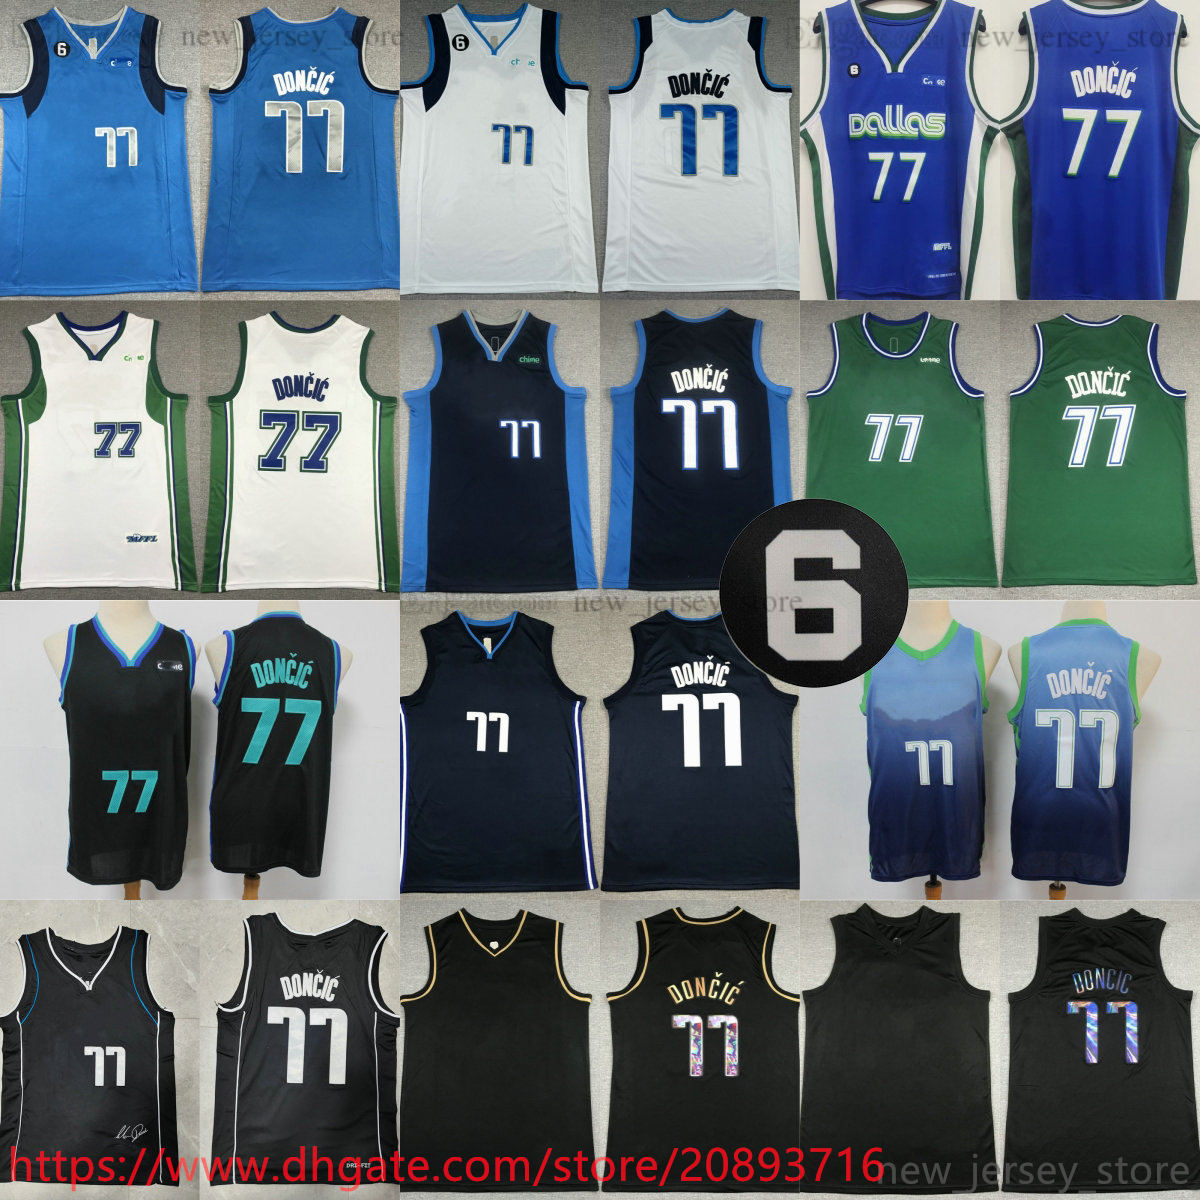 

New Season 6 patch Luka Basketball 77 Doncic Jerseys Stitched Man With Russell 6 Patch Jersey 22-23 Blue City White Black Golden, Aspicture (with team name)